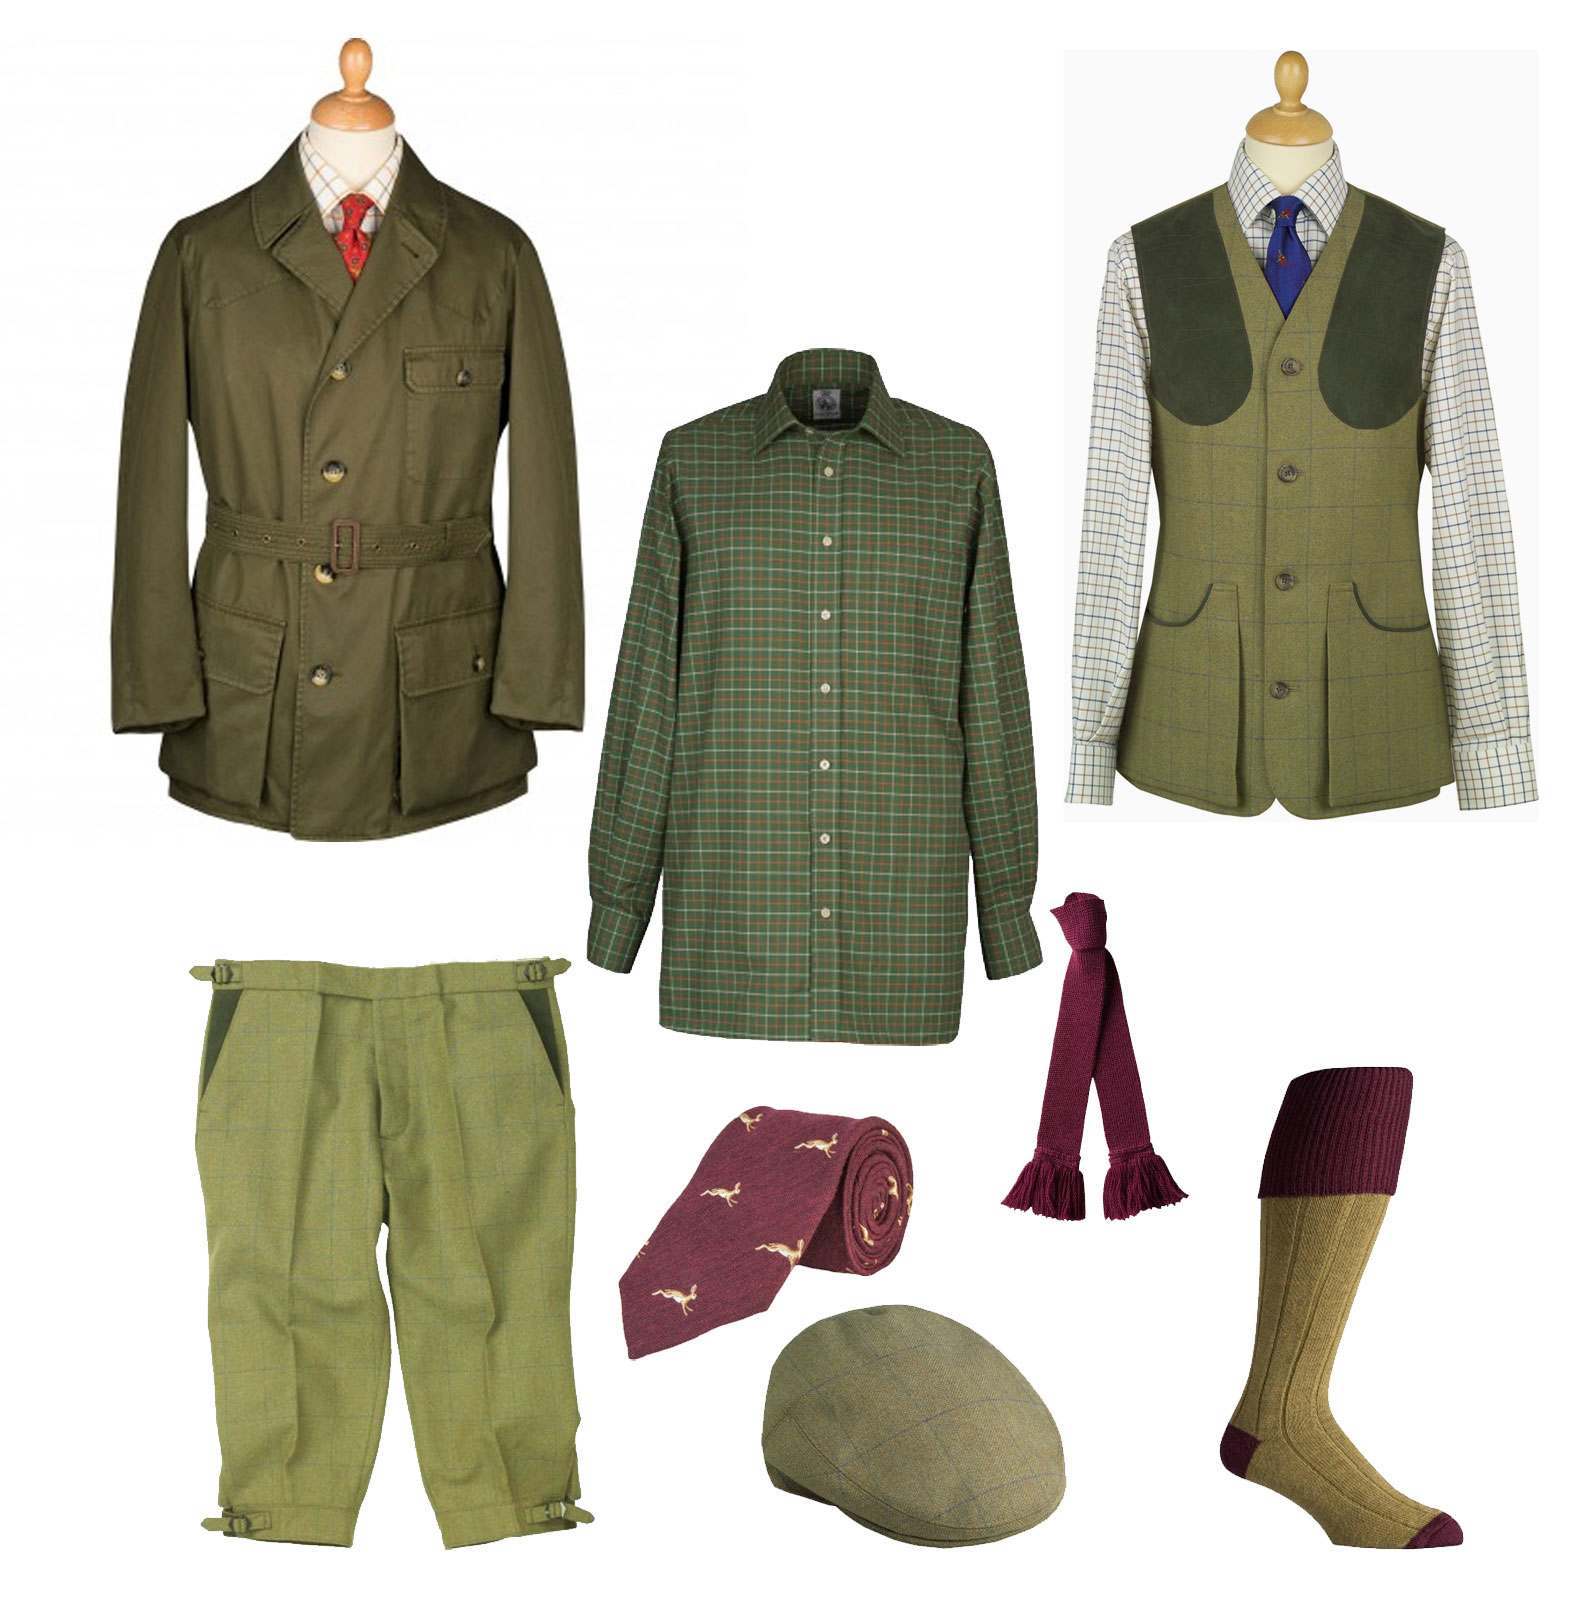 A range of items of clothing one would wear for shooting